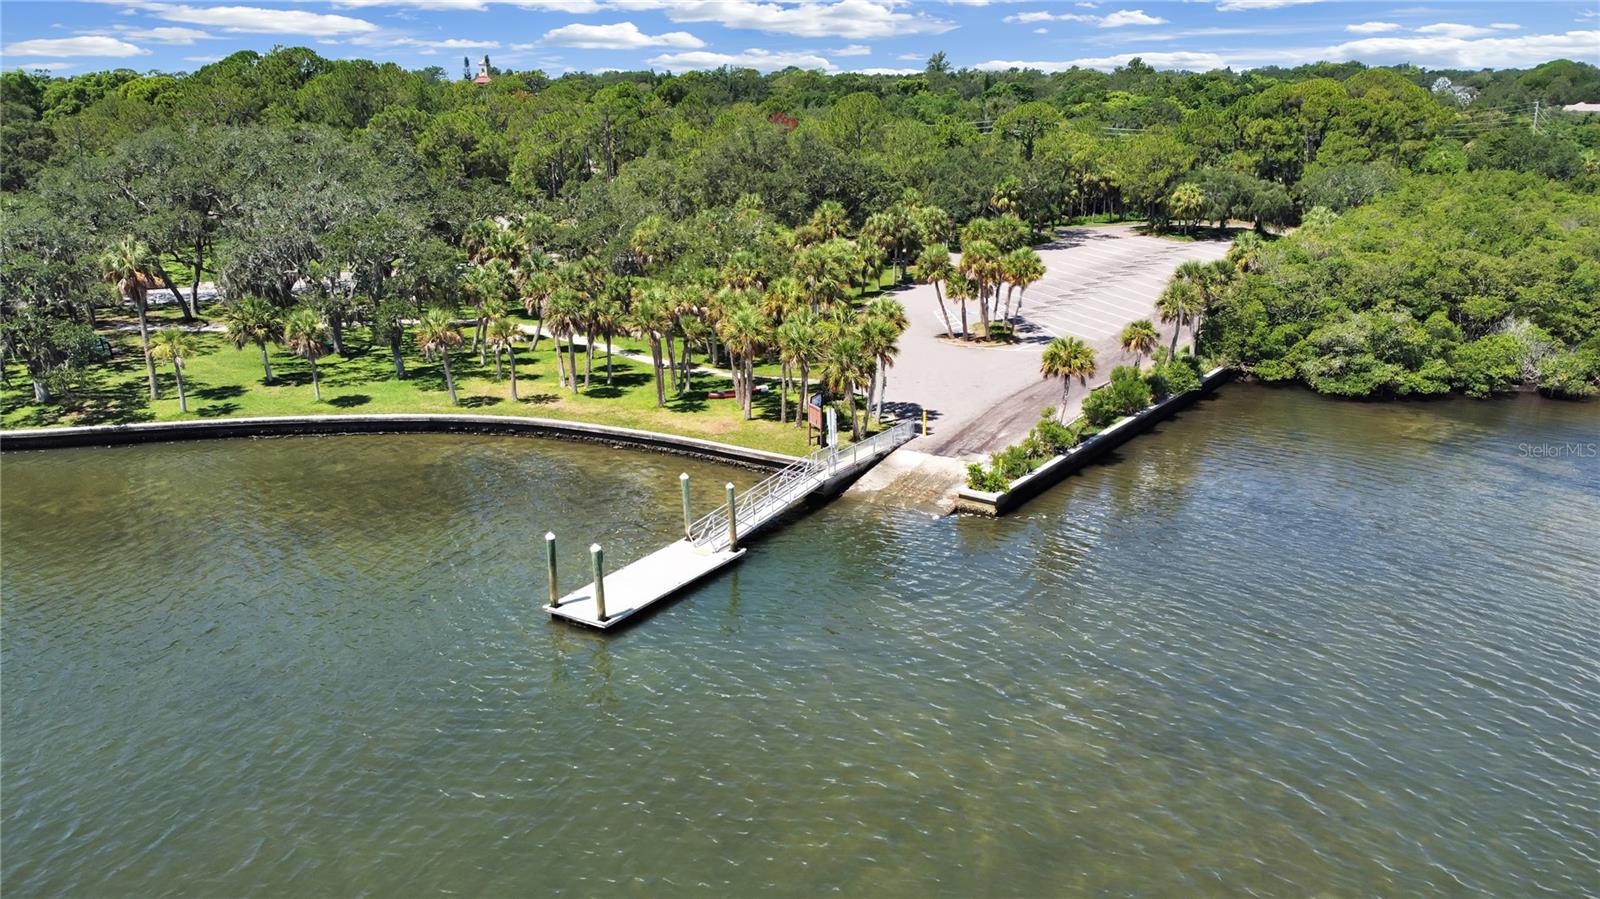 Boat launching ramp in Safety Harbor's Phillippe Park located just minutes away from subject property.